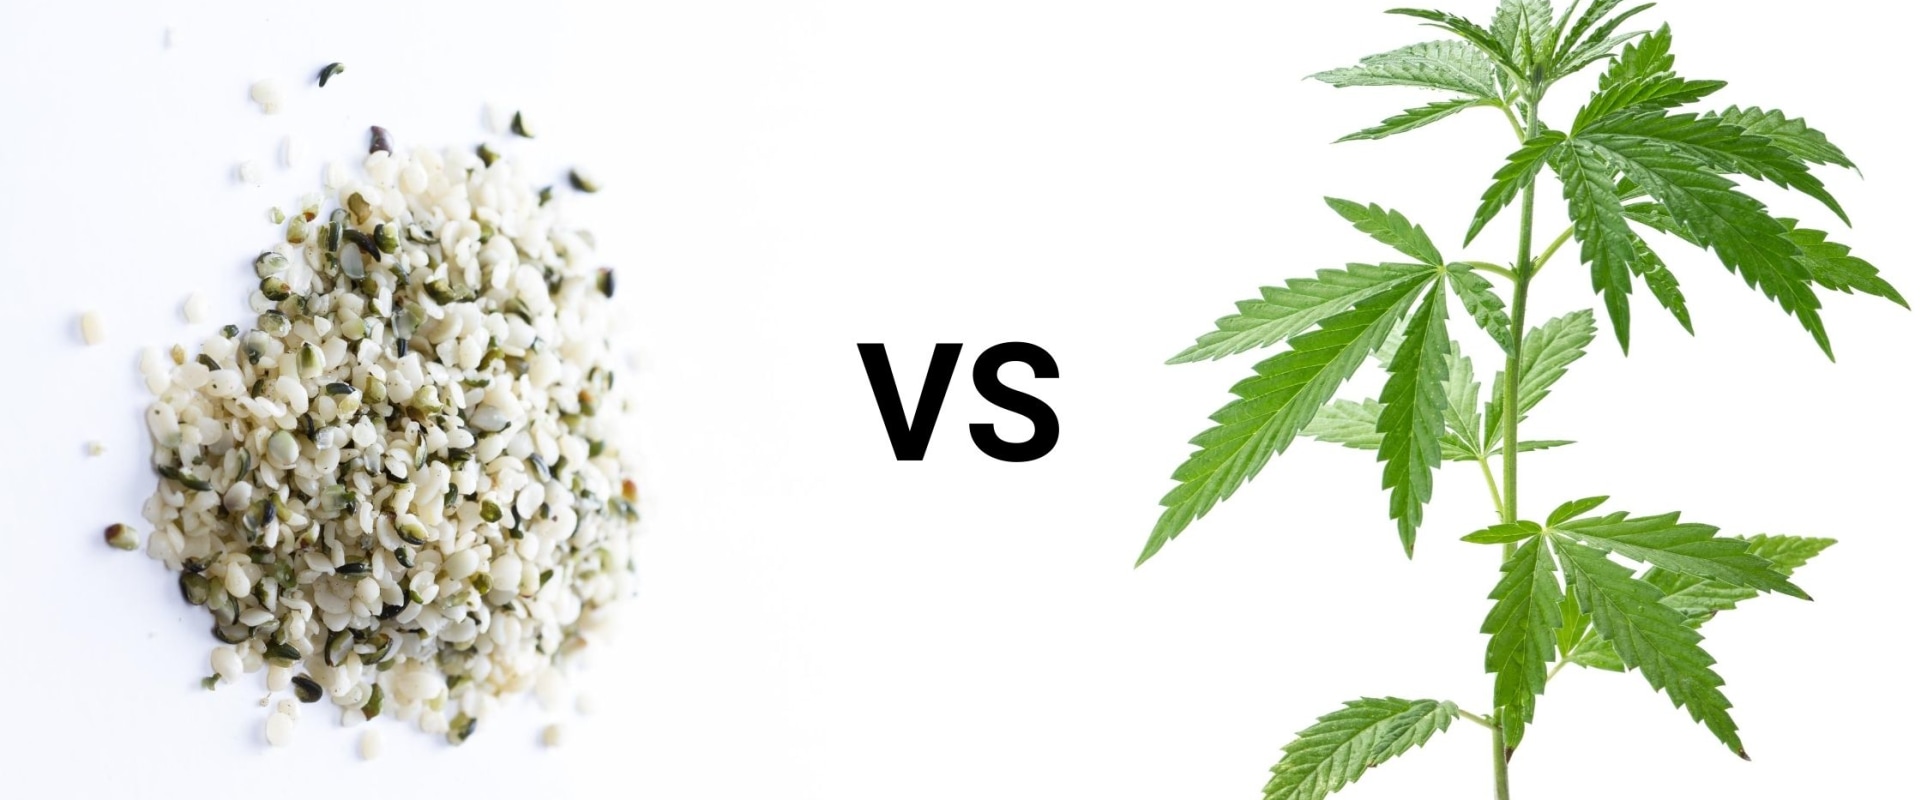 What's the Difference Between CBD Oil and Hemp Oil?